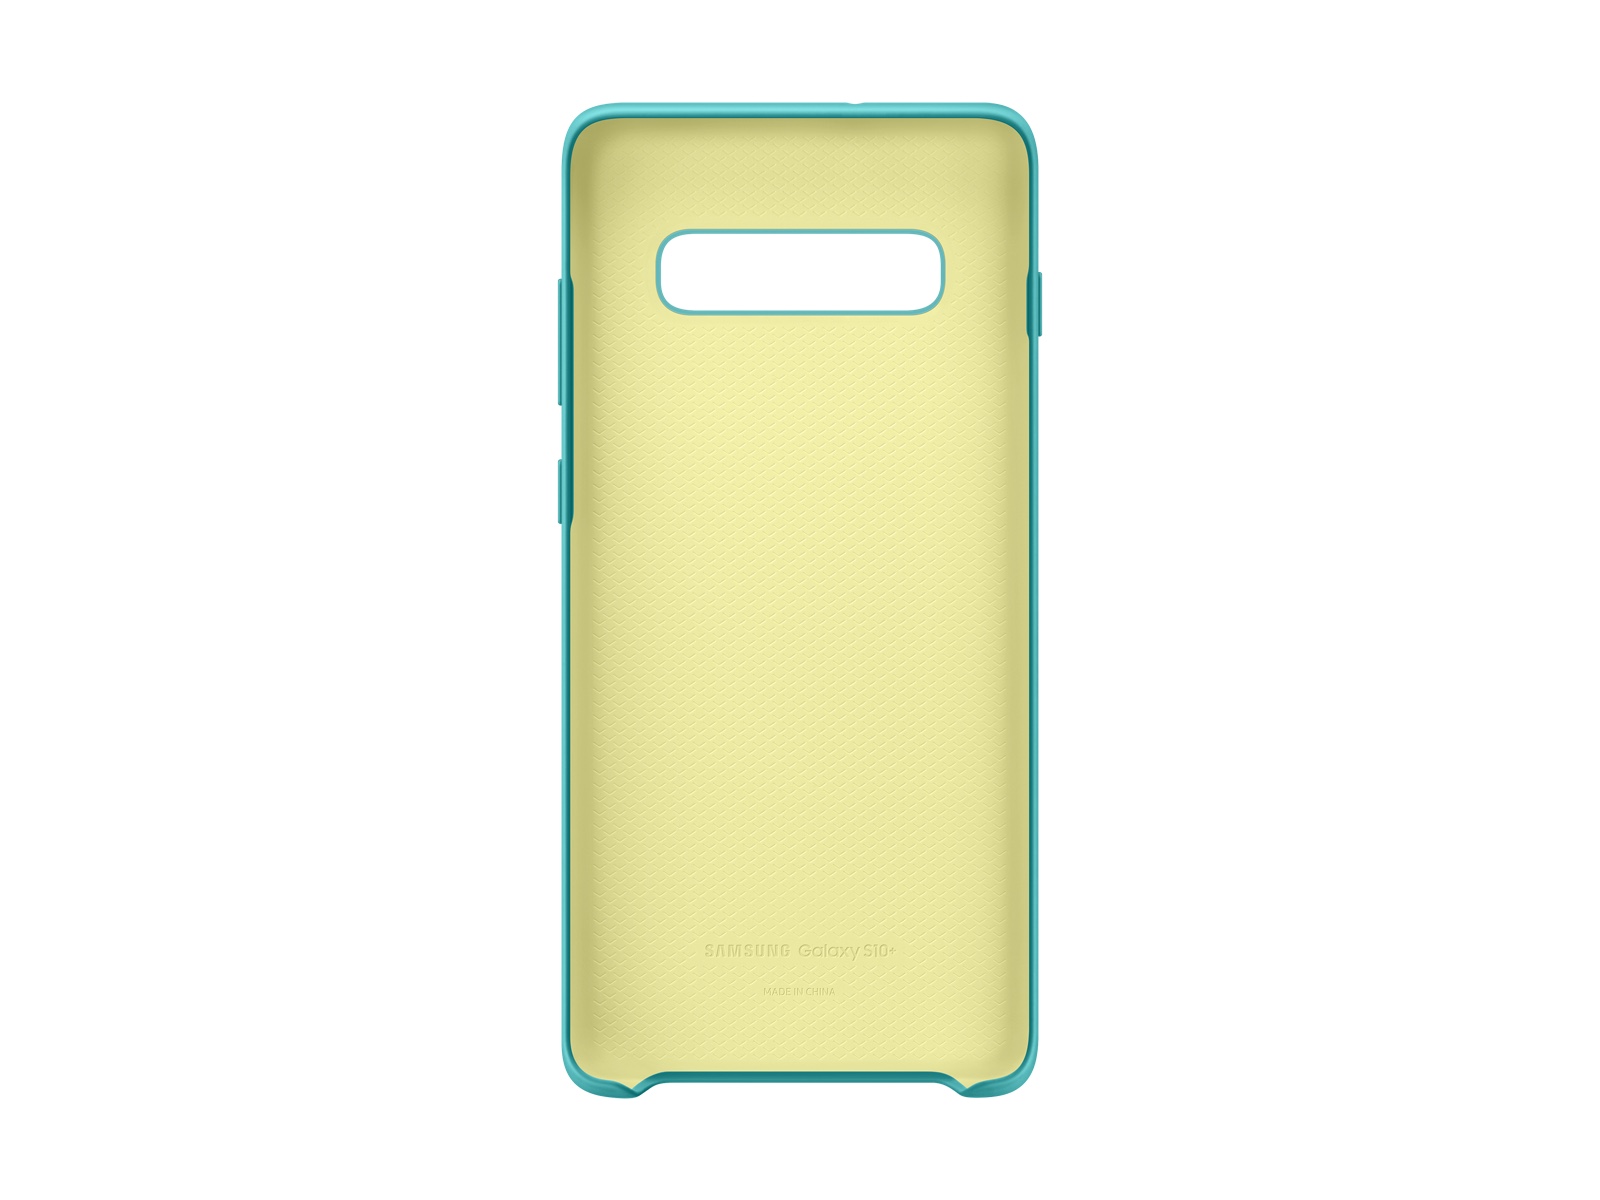 Thumbnail image of Galaxy S10+ Silicone Cover, Green